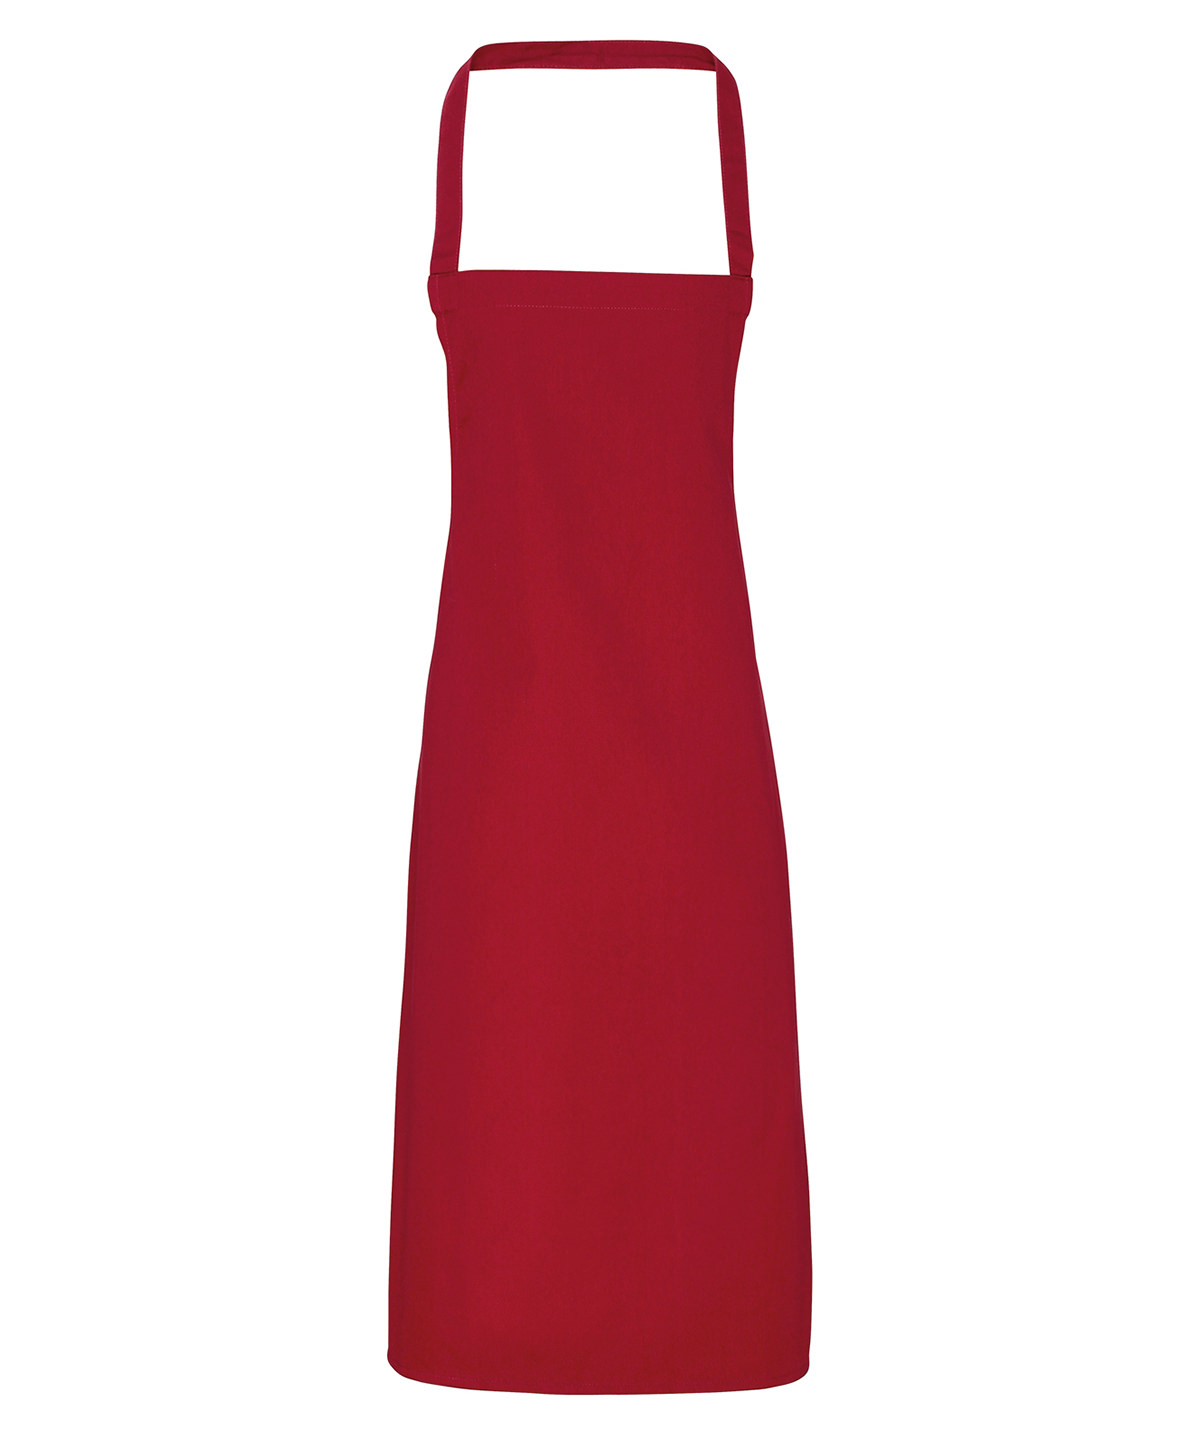 100% Cotton Apron - Organic Certified Burgundy Size One Size